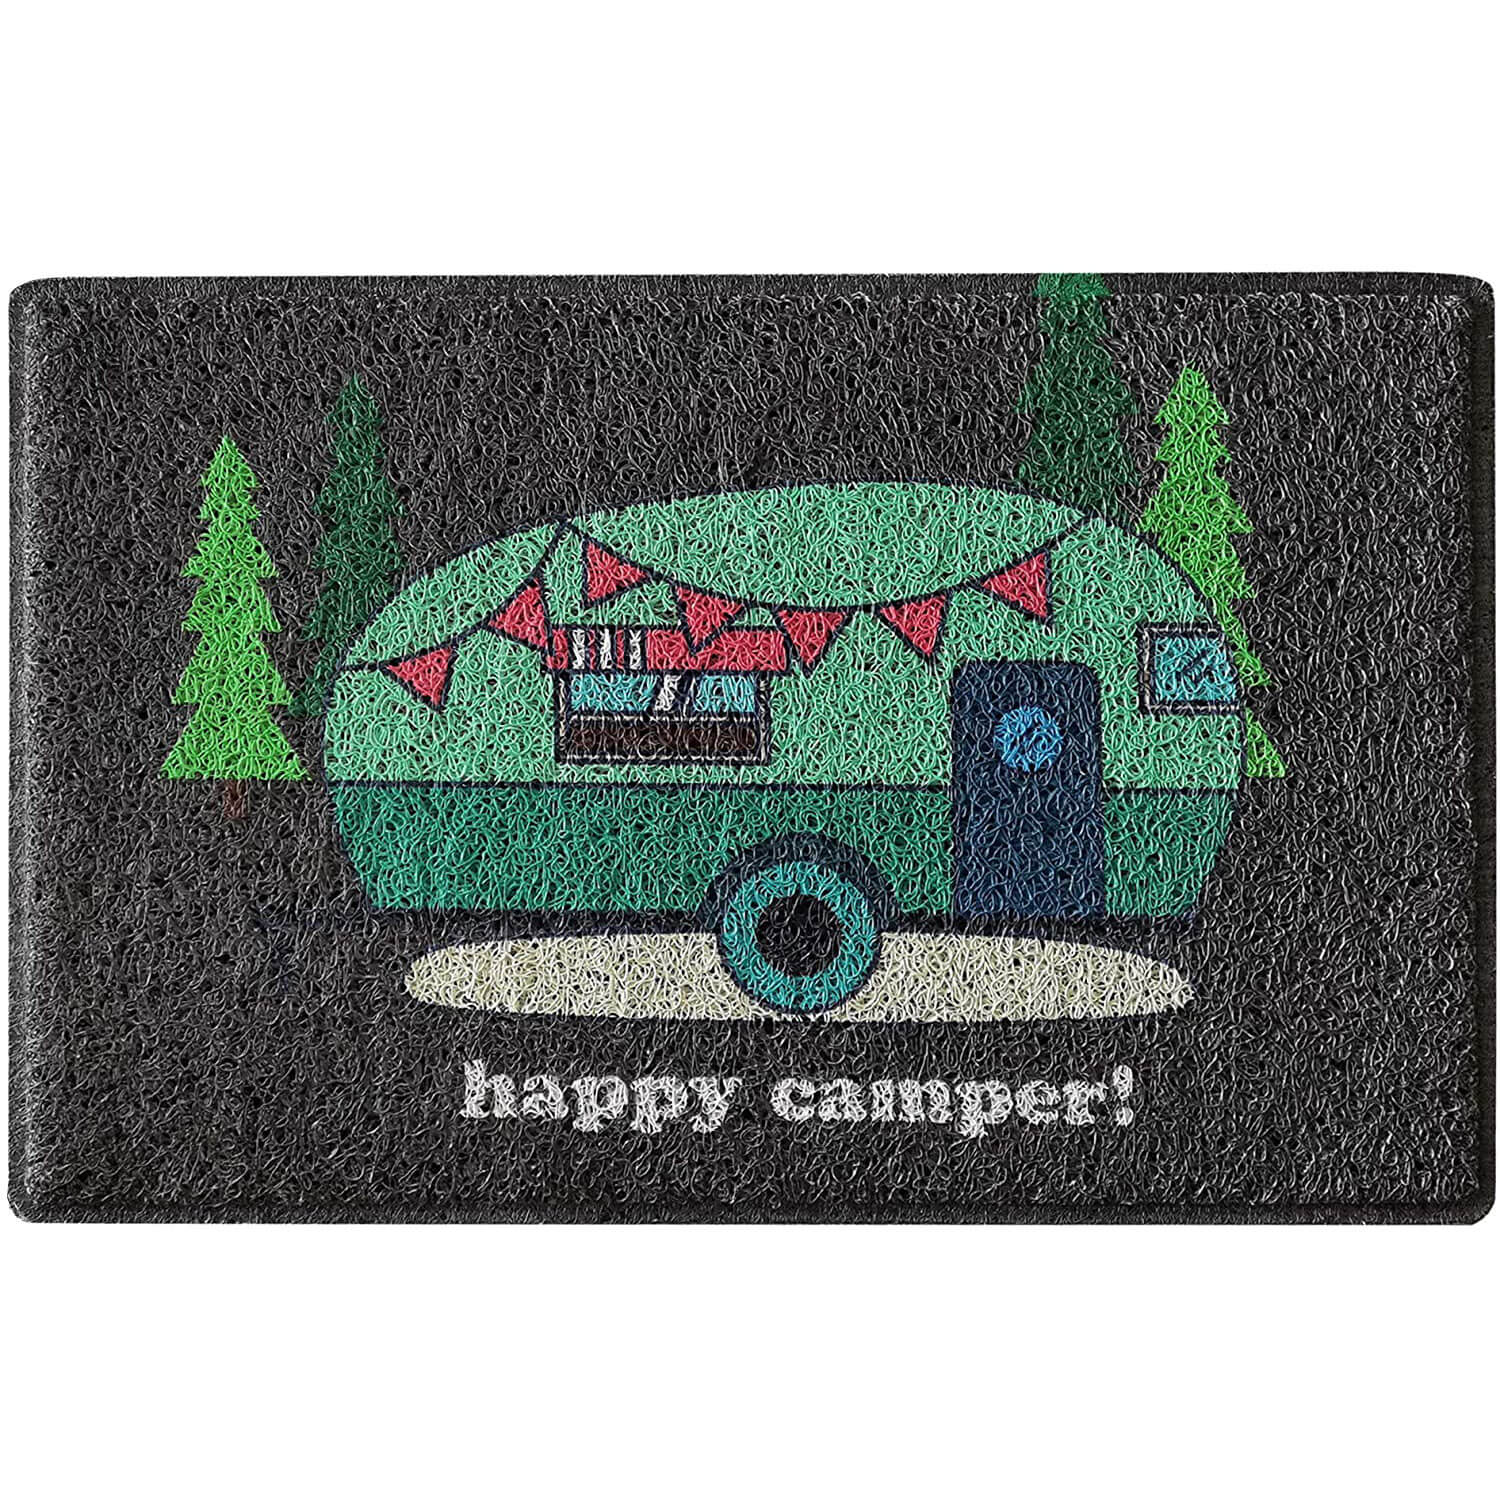 R.V. Life. Welcome Mat or Outdoor Rug - Green